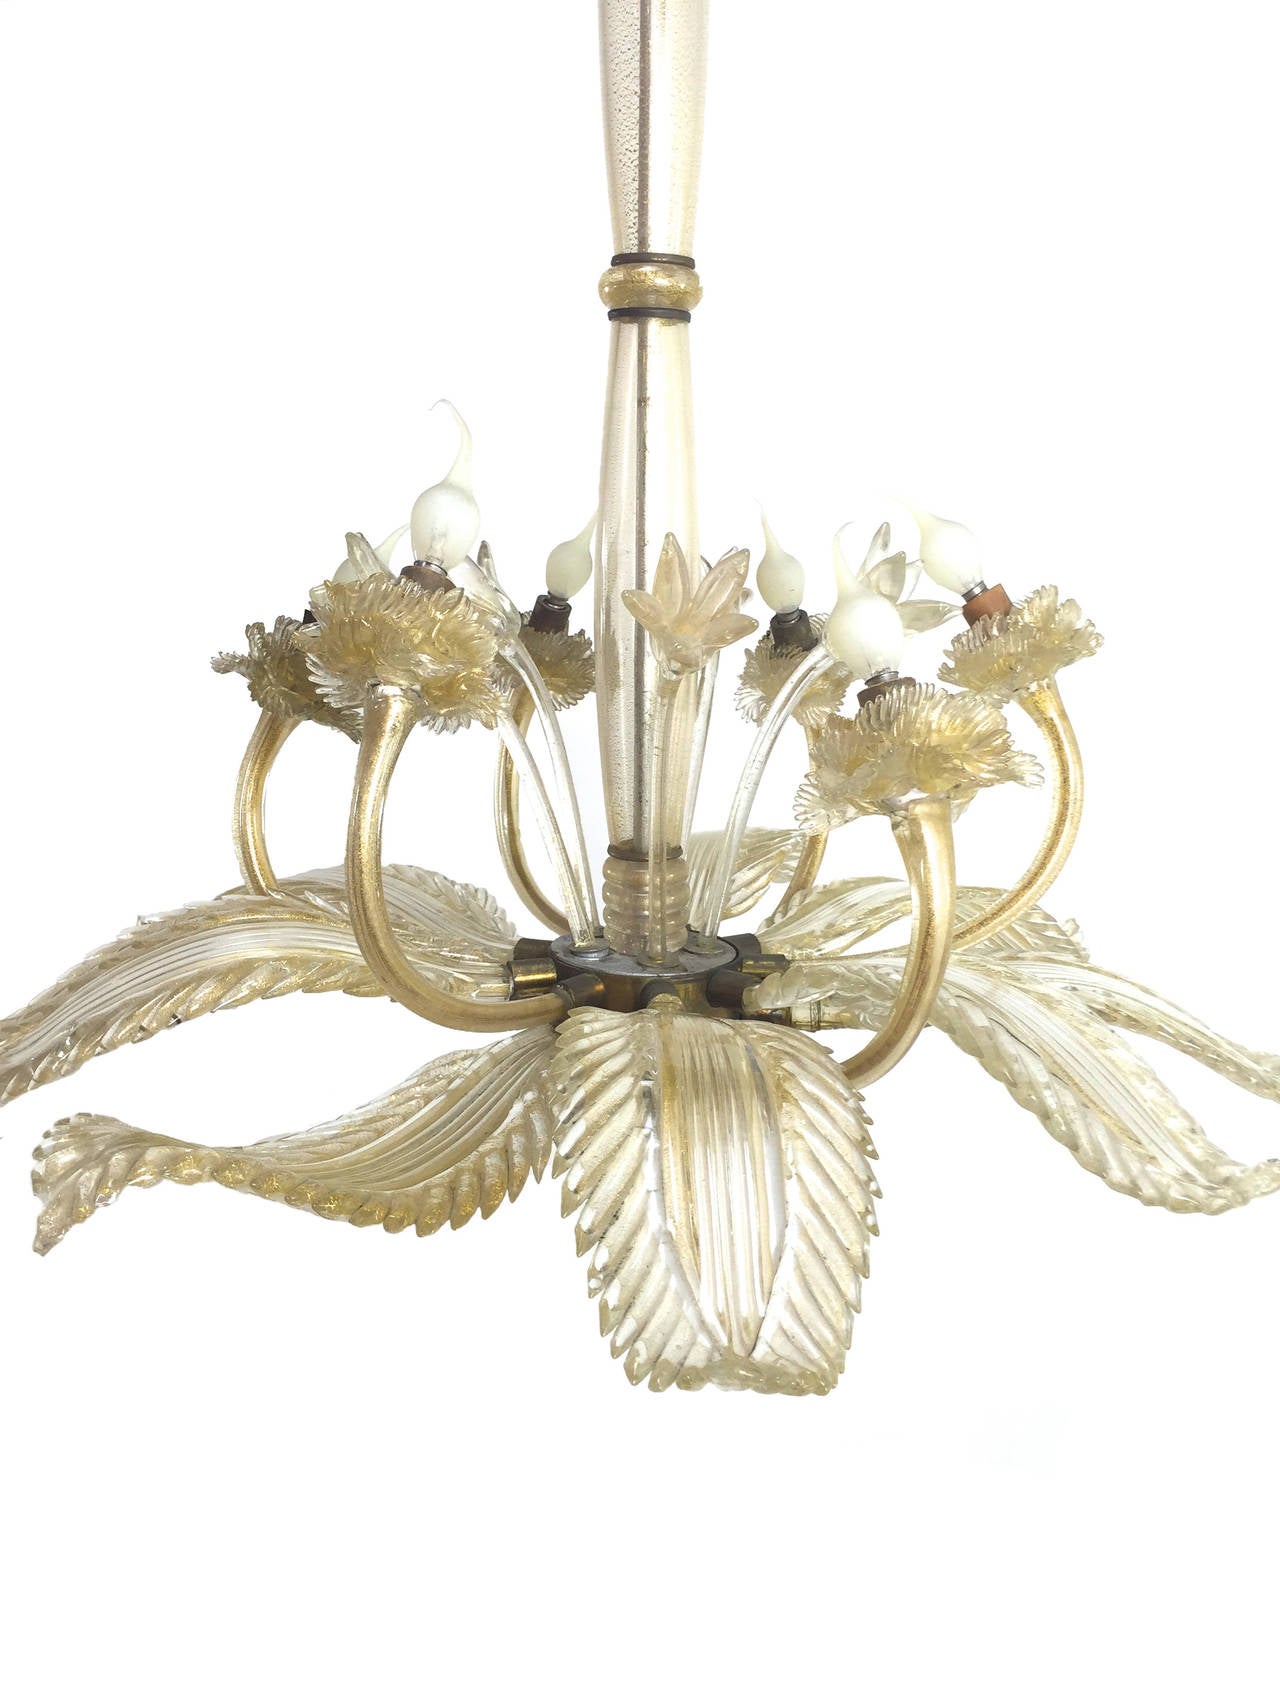 Stunning blown glass chandelier with gold inclusion. Barovier and Toso, Murano Italy.